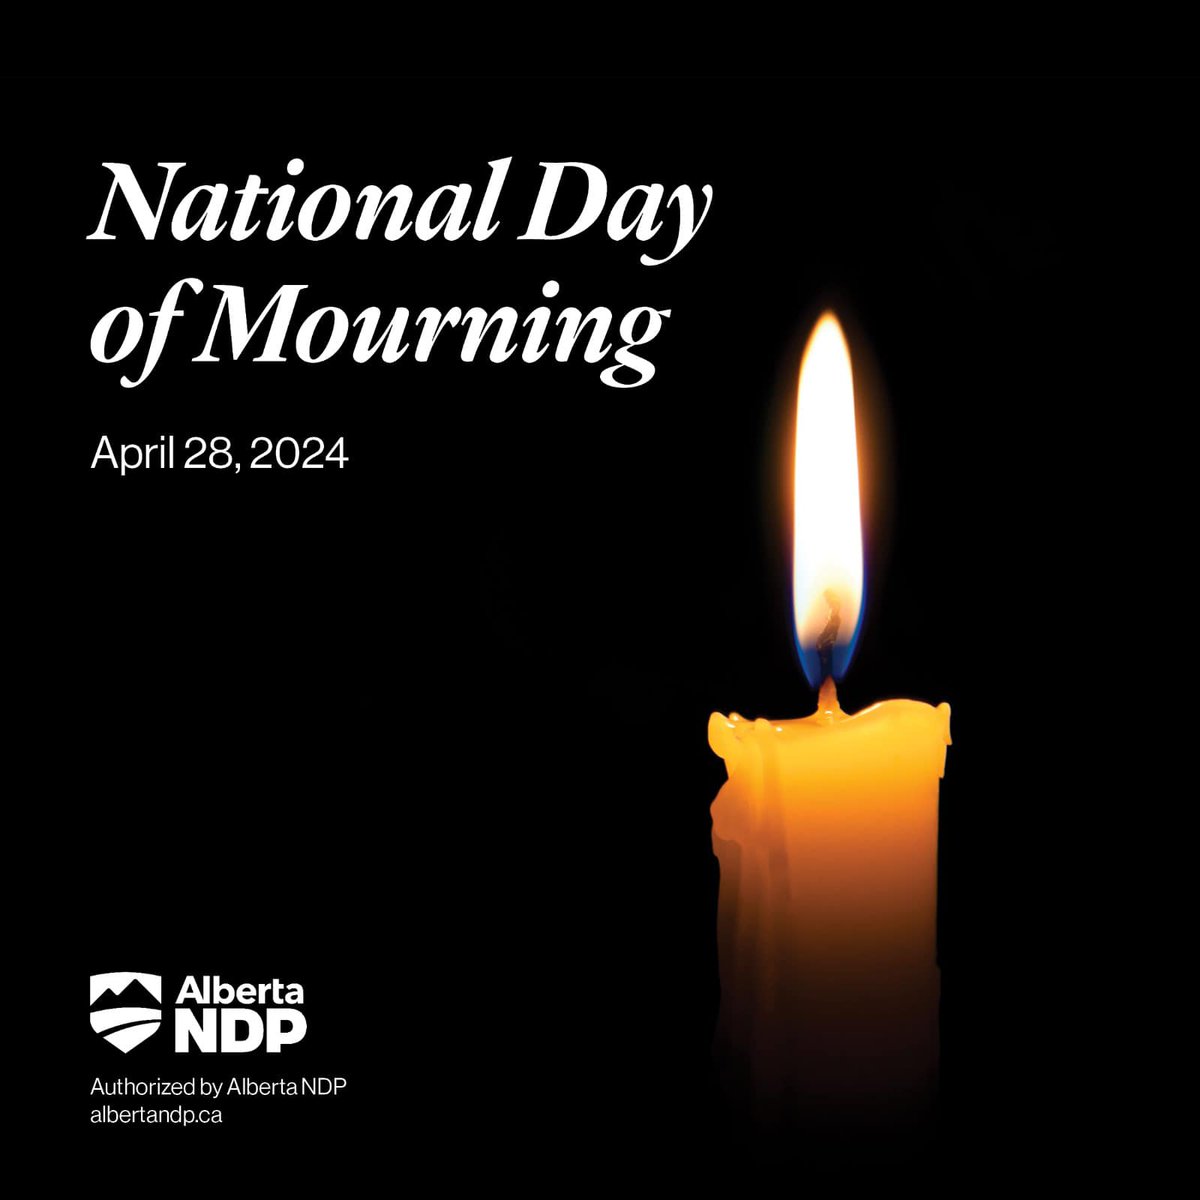 Today I join all Albertans in recognizing the #DayOfMourning, to remember Albertans who lost their lives from workplace-related illness or injury.

May they rest in peace.

Every Albertan who goes to work, regardless of their occupation, has the right to go home safely after